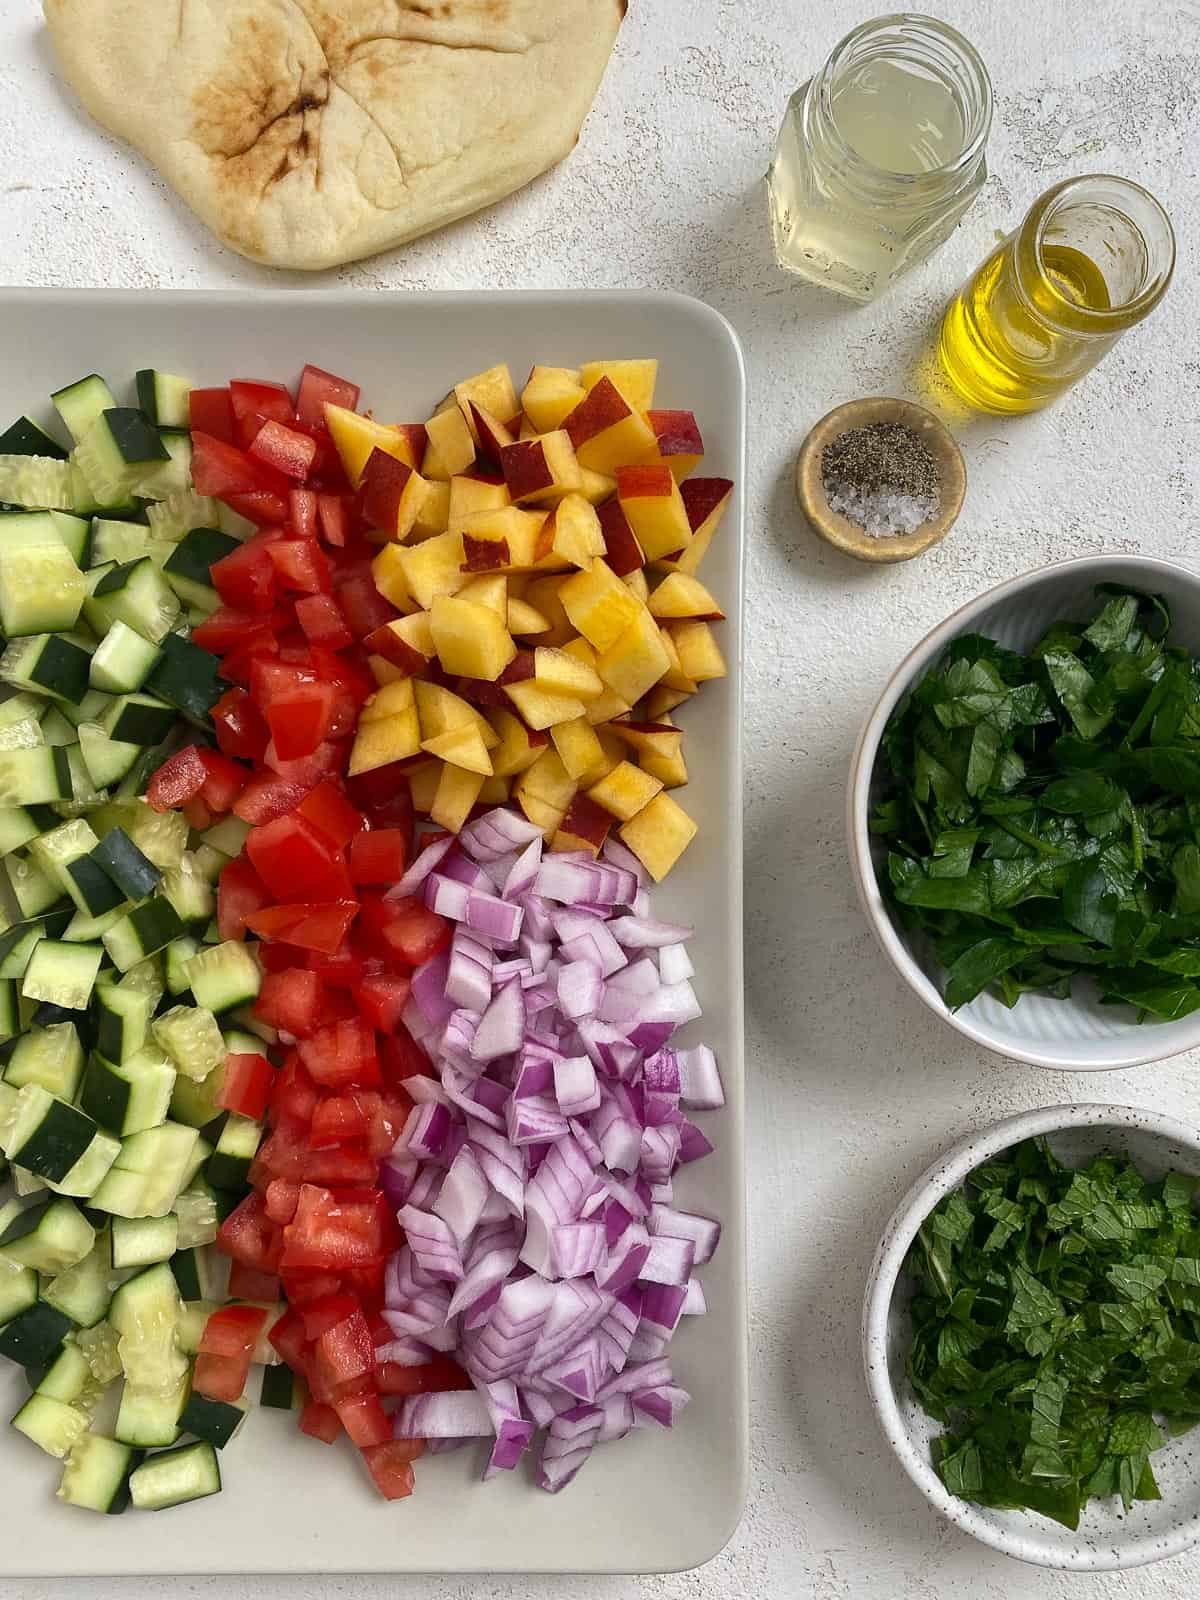 ingredients for Easy Summer Fattoush Salad measured out and sorted in bowls and on a tray